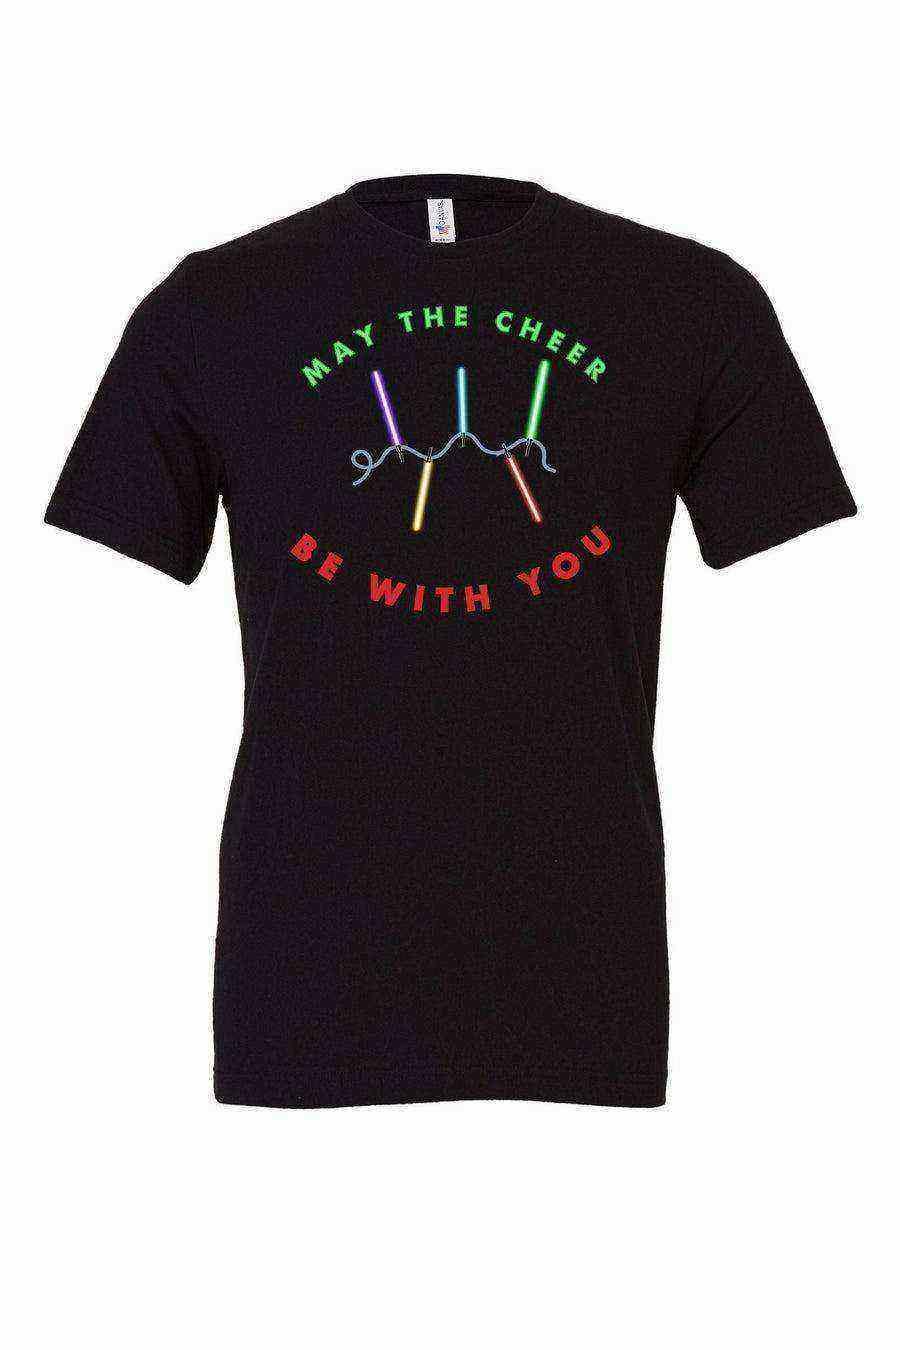 Youth | May The Cheer Be With You Shirt | Star Wars Christmas Shirt - Dylan's Tees